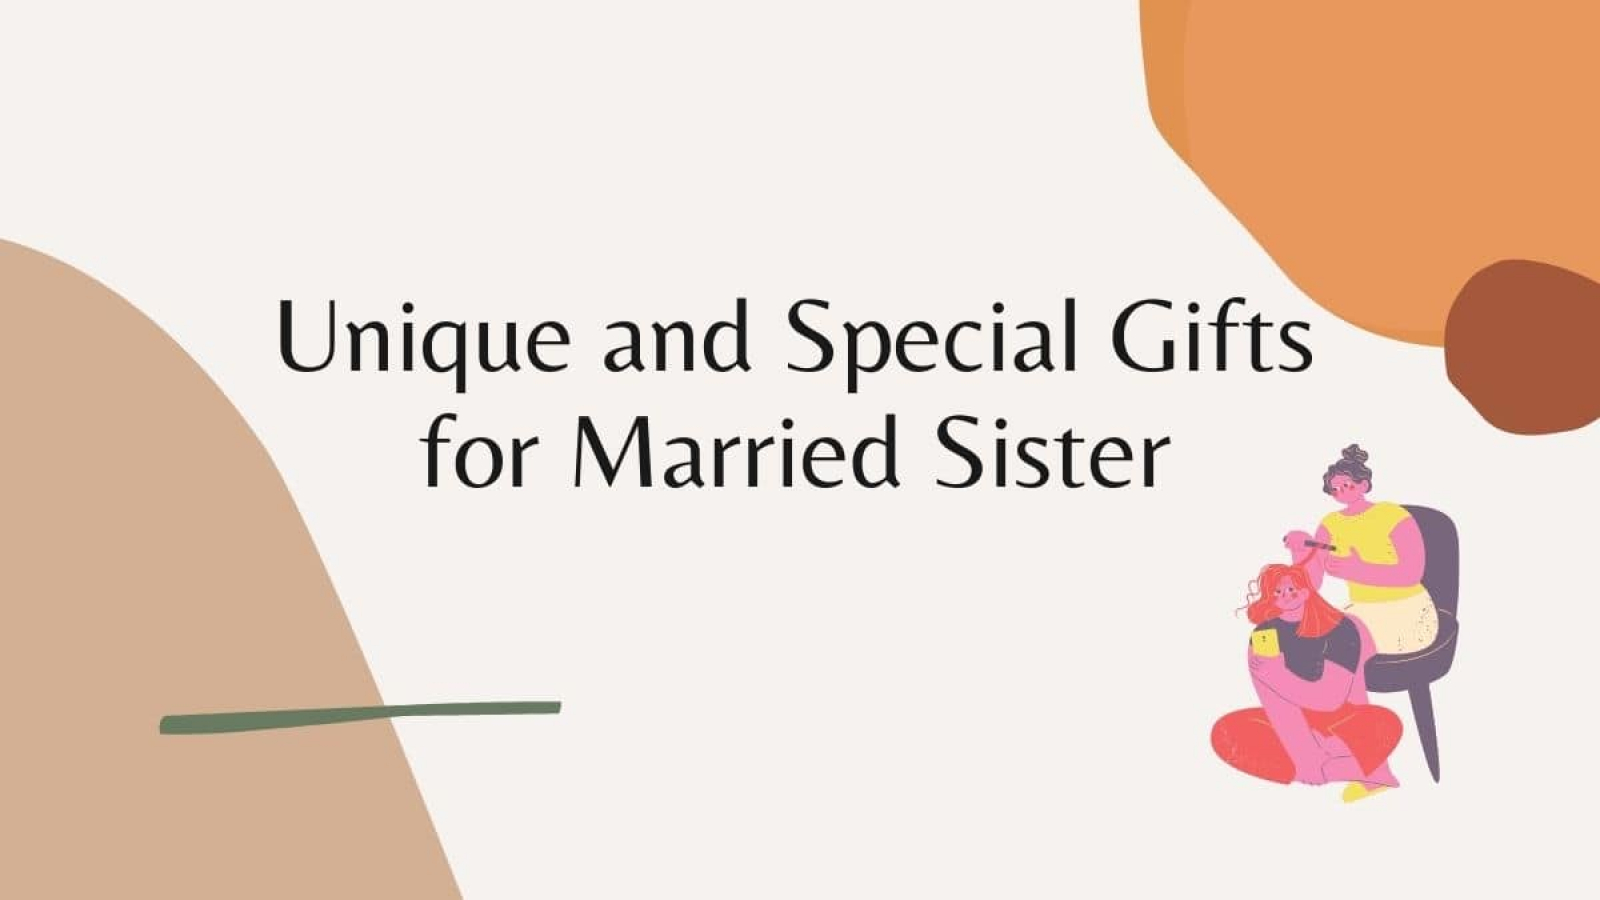 Unique and Special Gifts for Married Sister